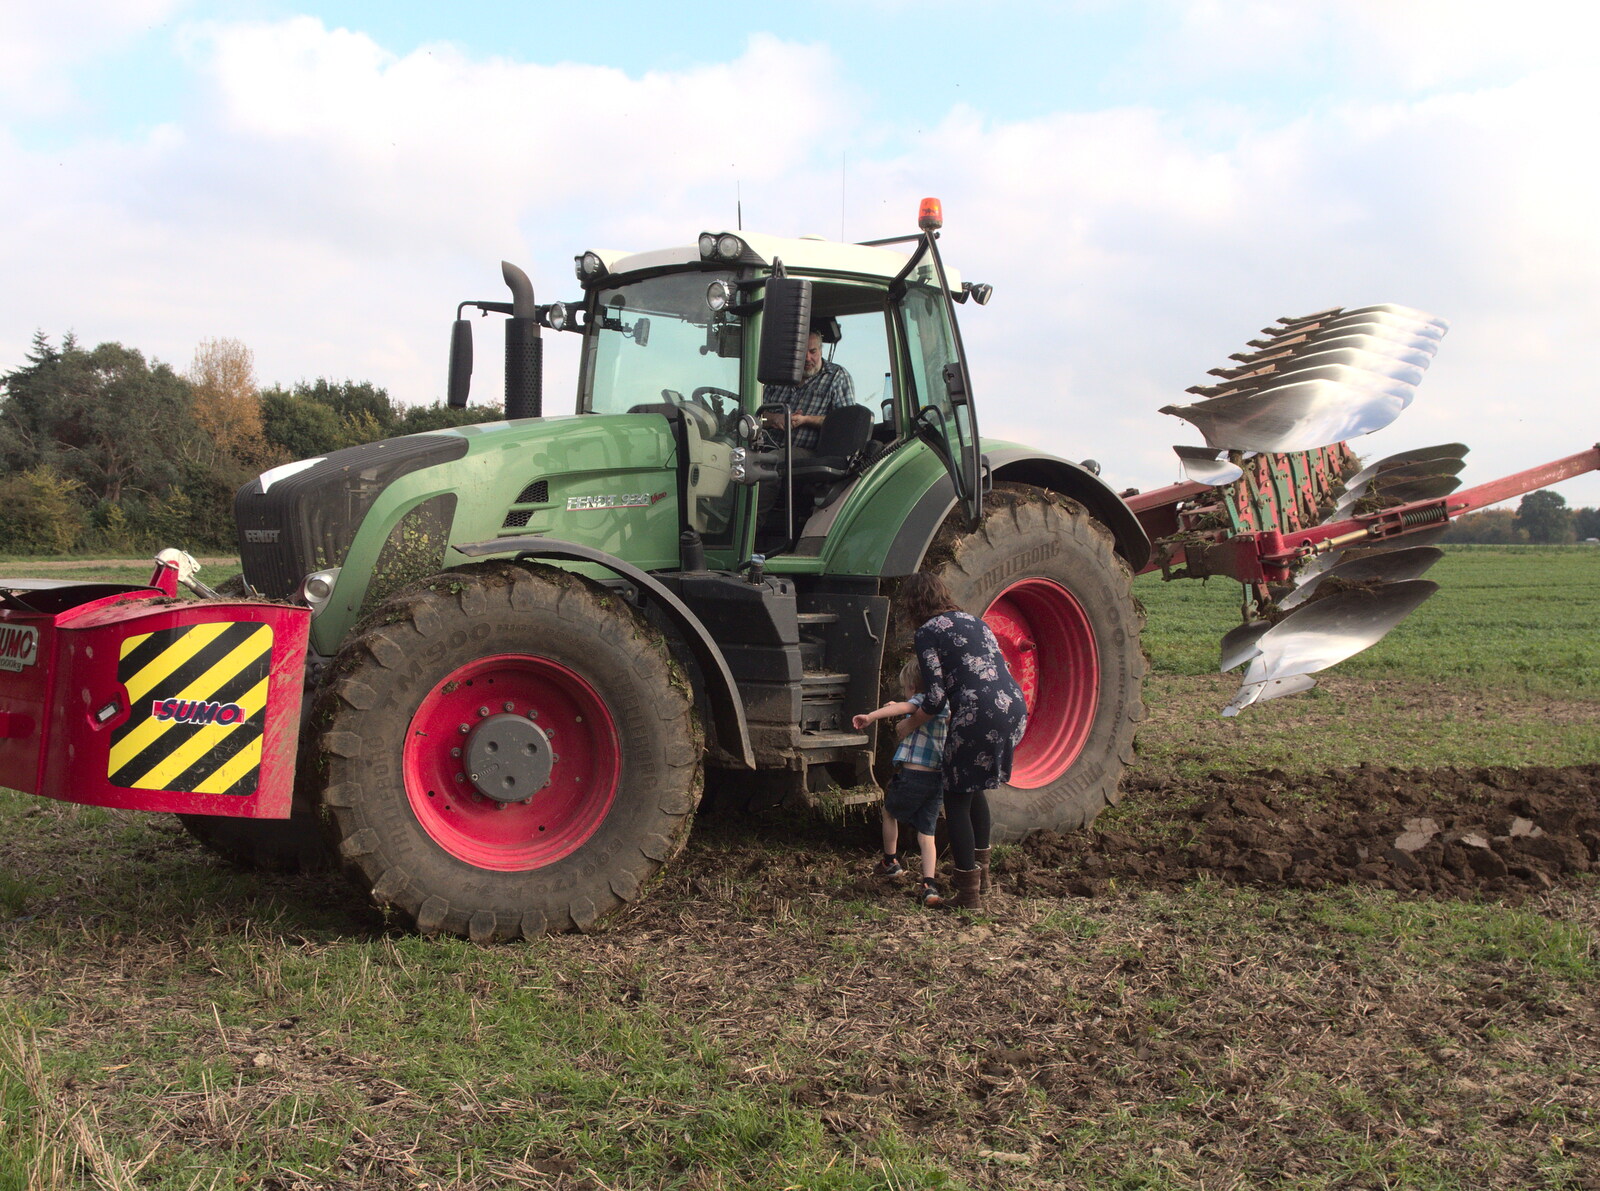 Isobel and Harry climb up to the tractor cab from Tractor Rides and Pub Cellars, Brome, Suffolk - 29th October 2016